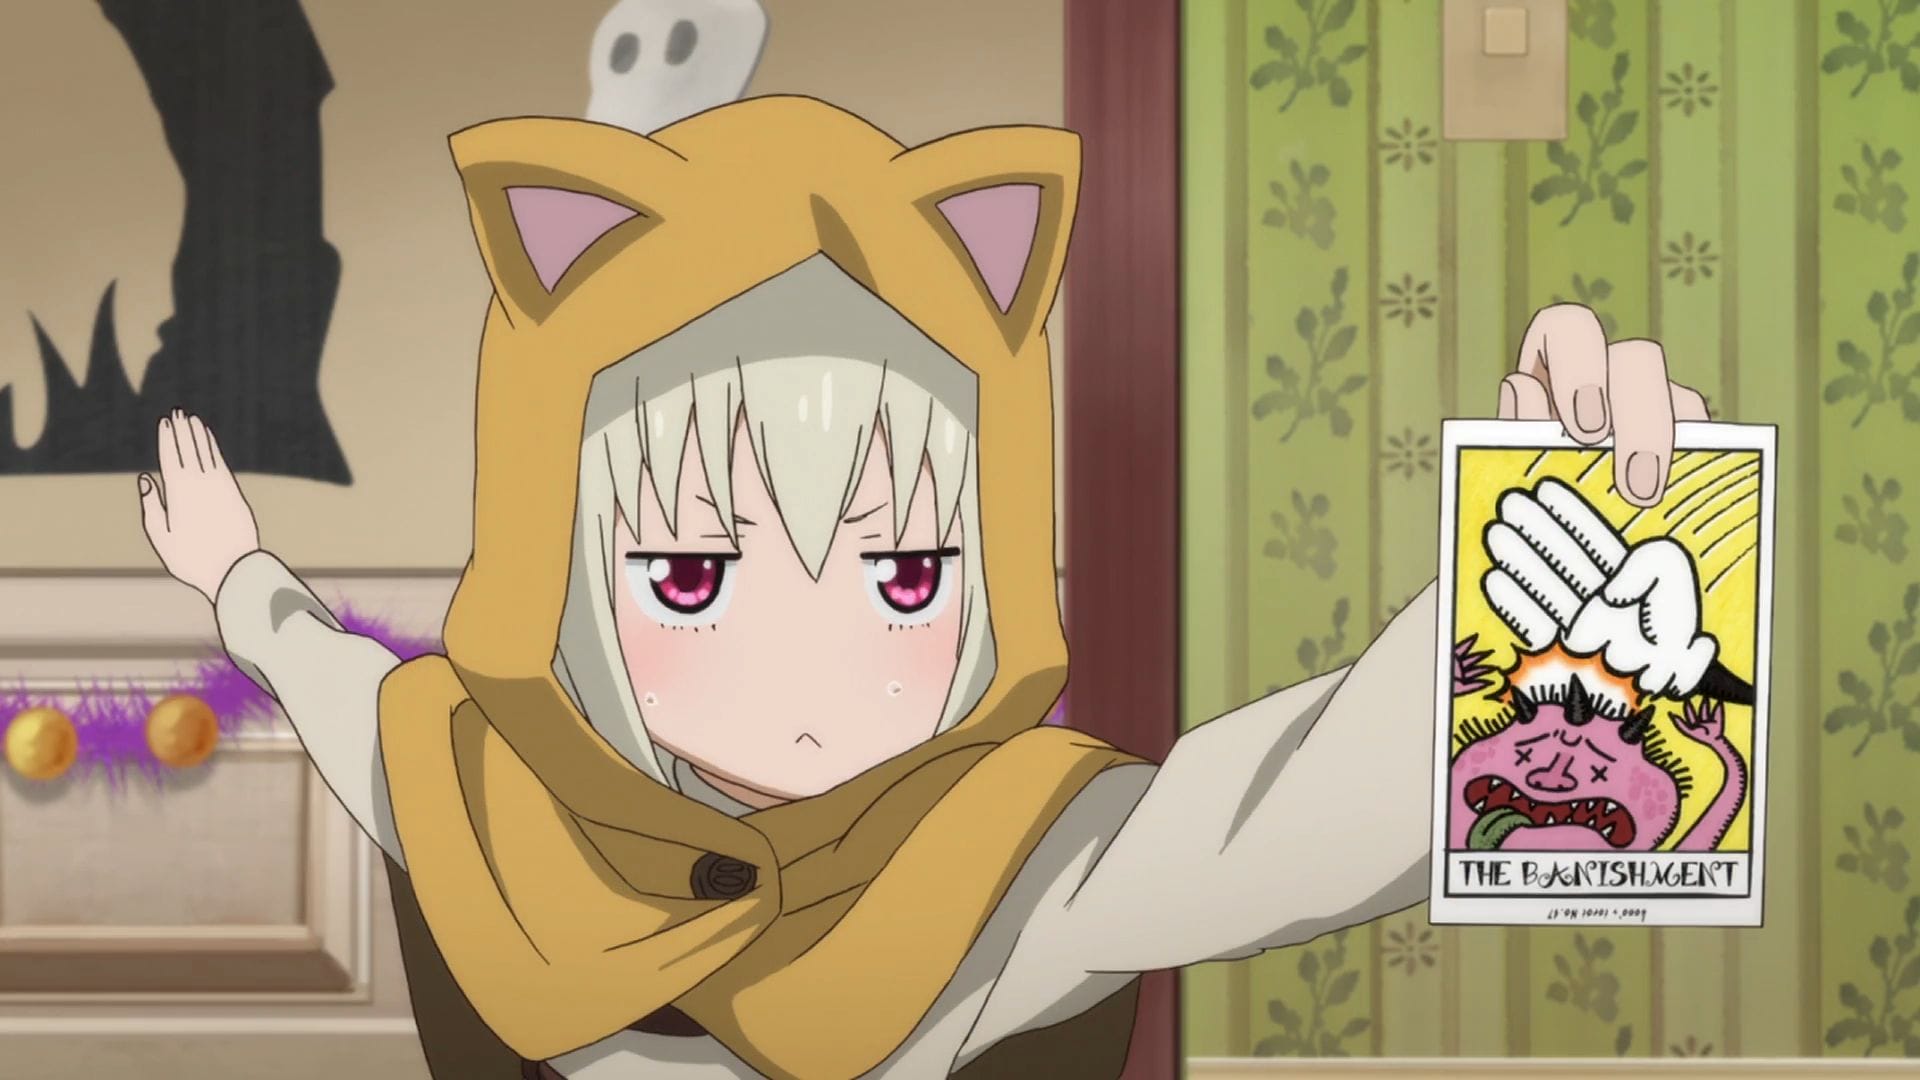 Soul Eater NOT! Complete Series Collection • Anime UK News